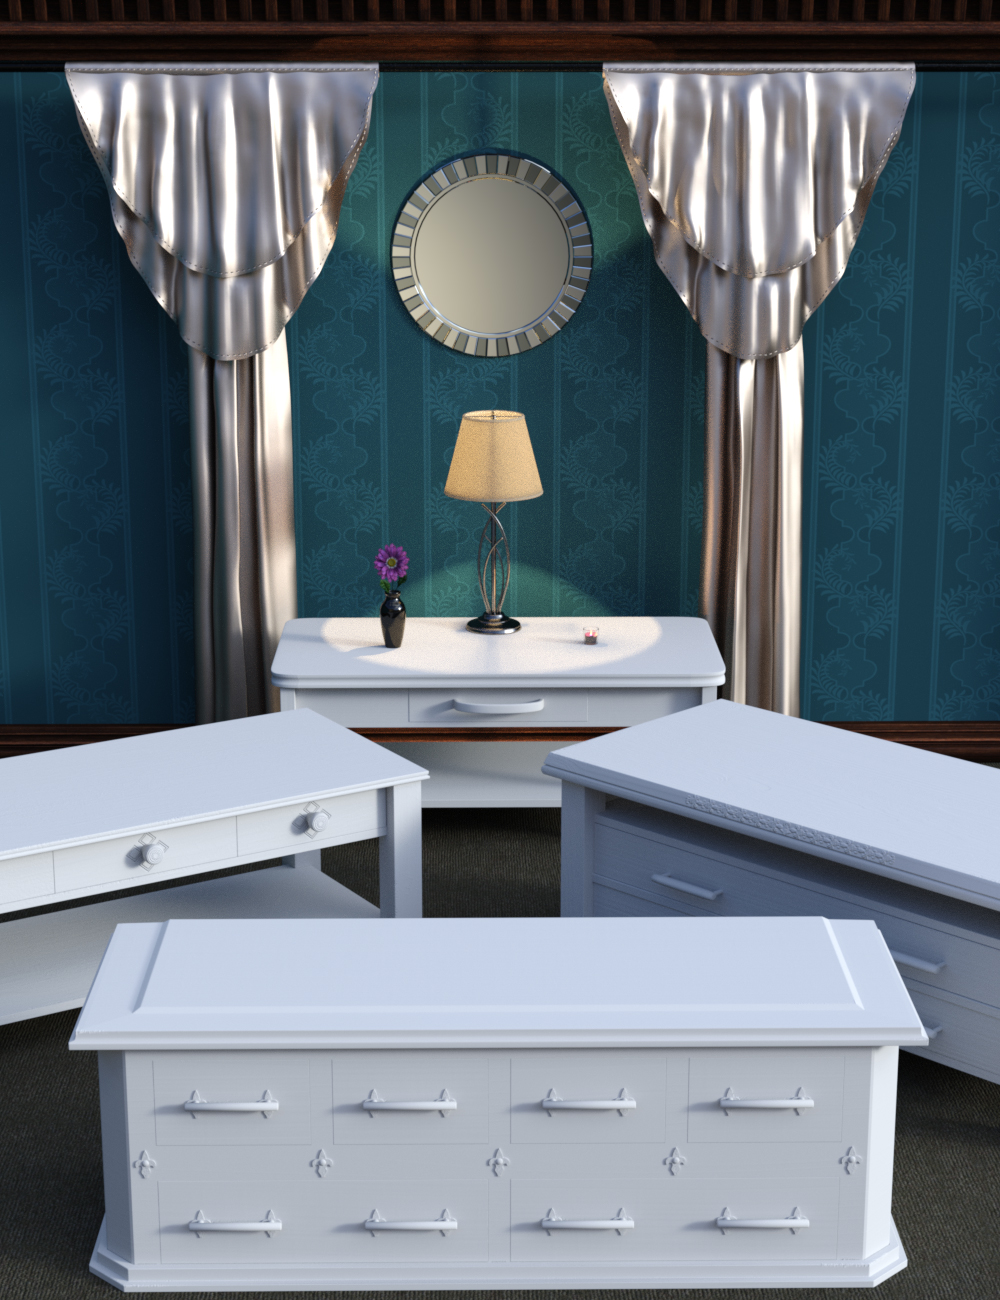 Furniture Frenzy by: ARTCollab, 3D Models by Daz 3D